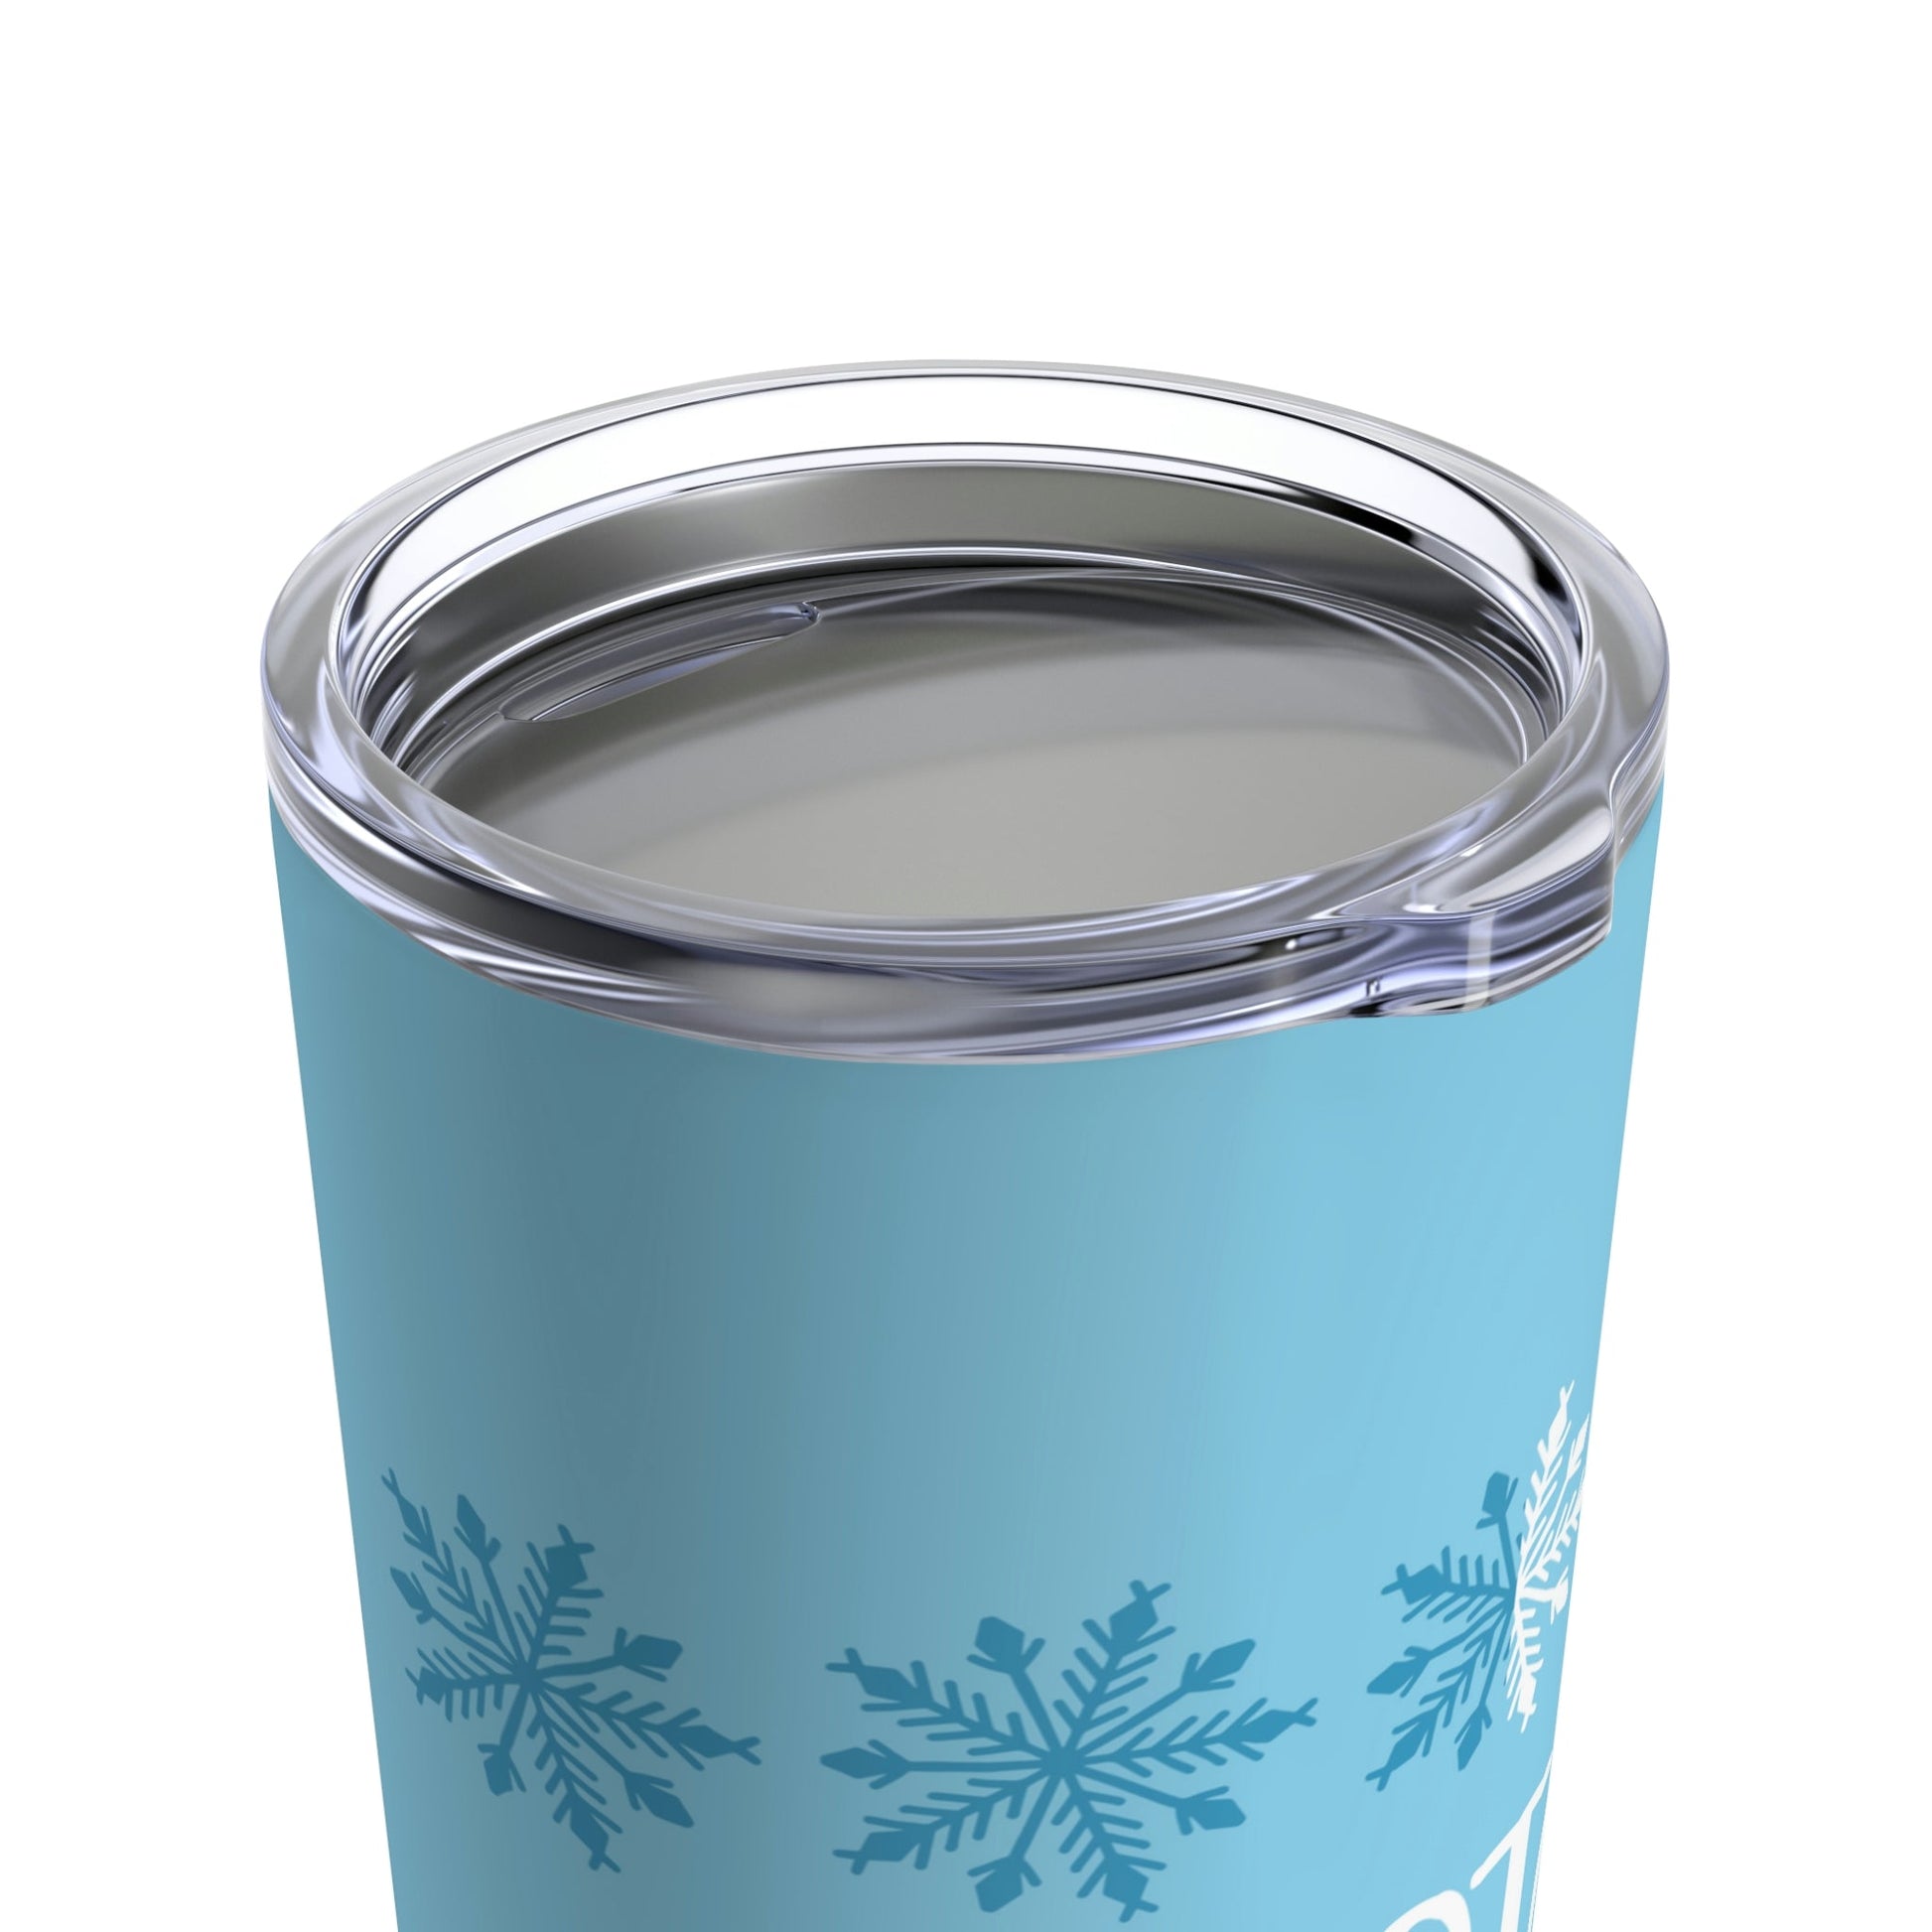 Christmas Loading Funny Snow Setup Stainless Steel Hot or Cold Vacuum Tumbler 20oz Ichaku [Perfect Gifts Selection]